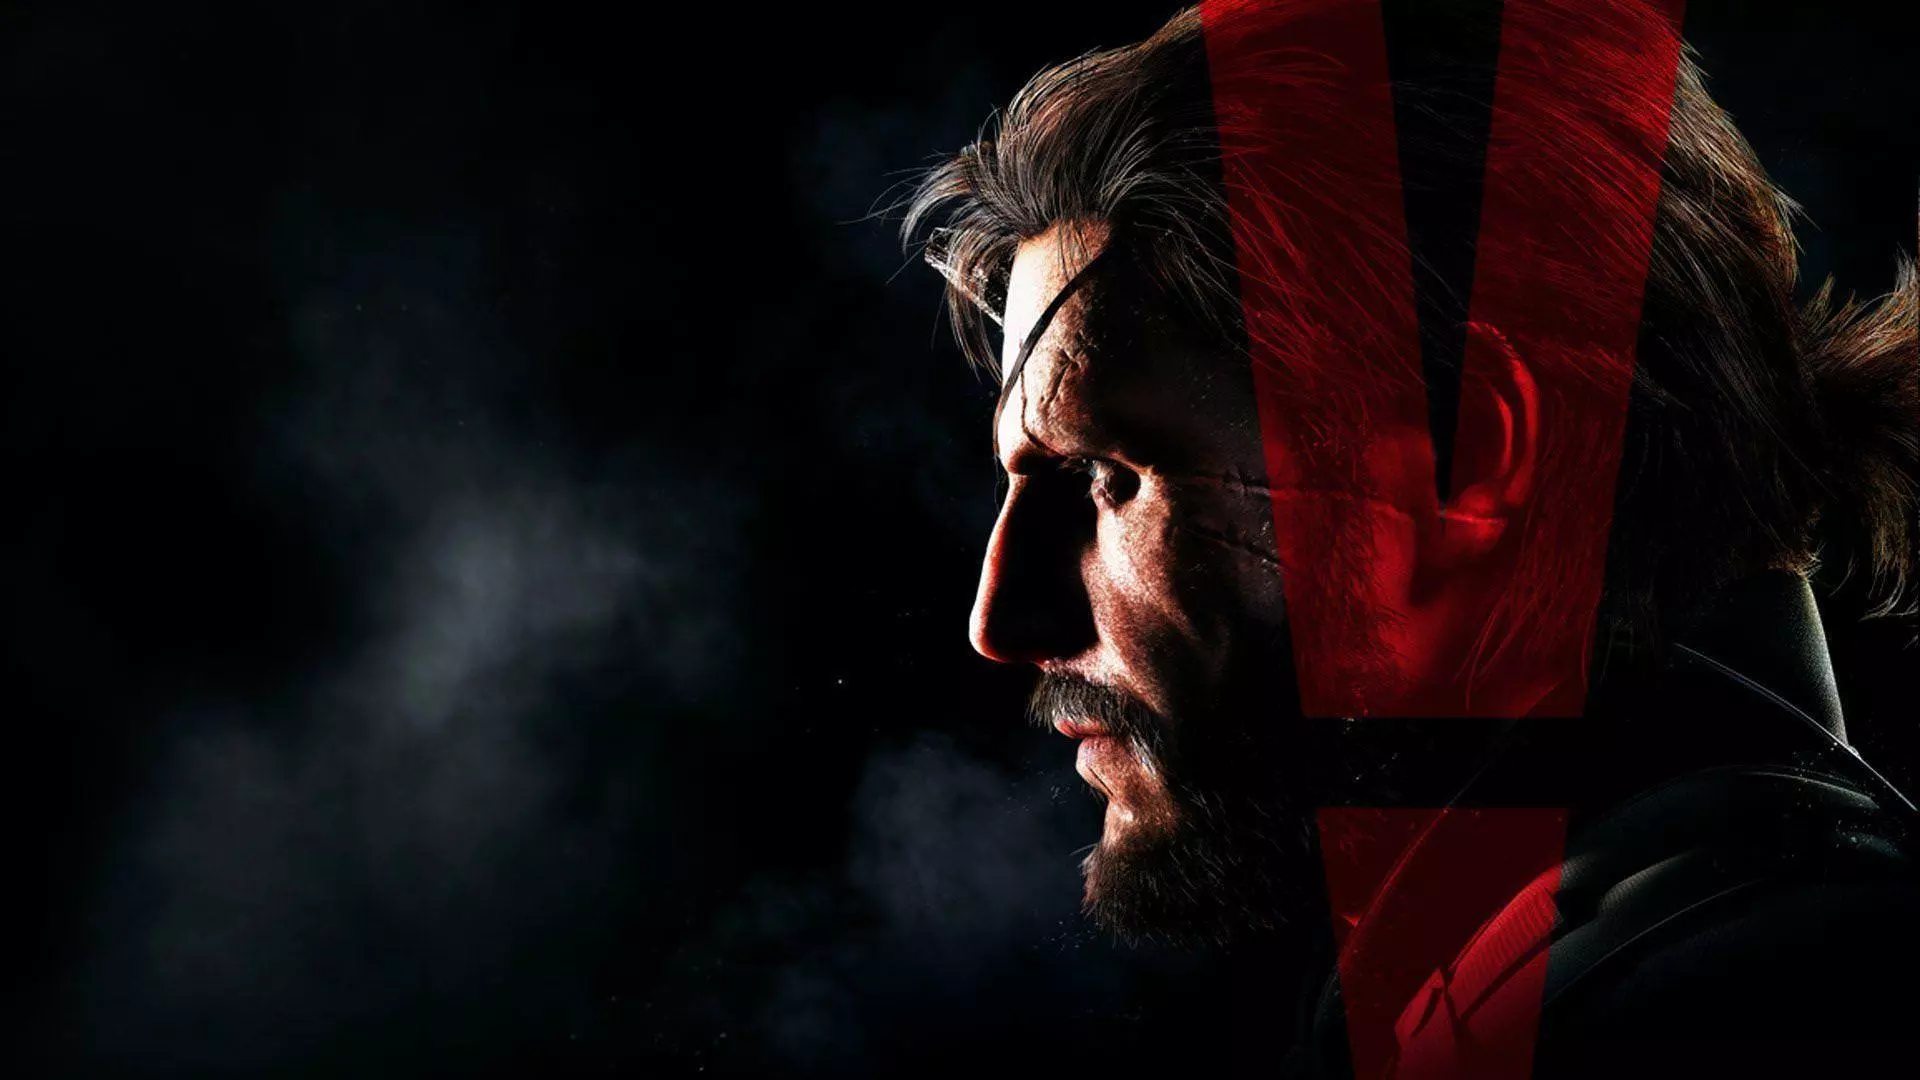 Snake and game logo Metal Gear Solid V: The Phantom Pain